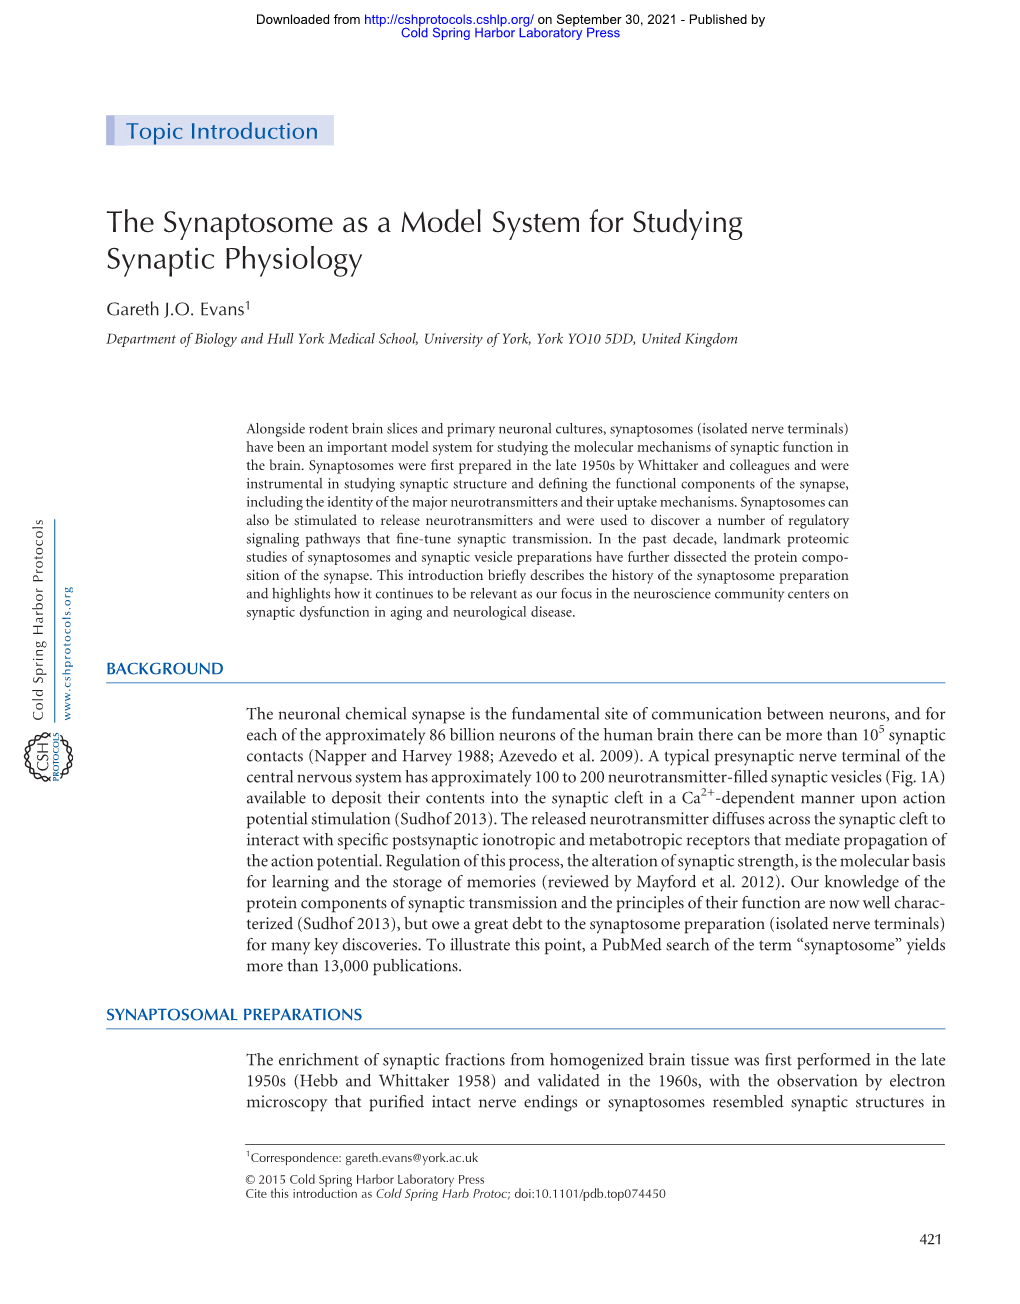 The Synaptosome As a Model System for Studying Synaptic Physiology